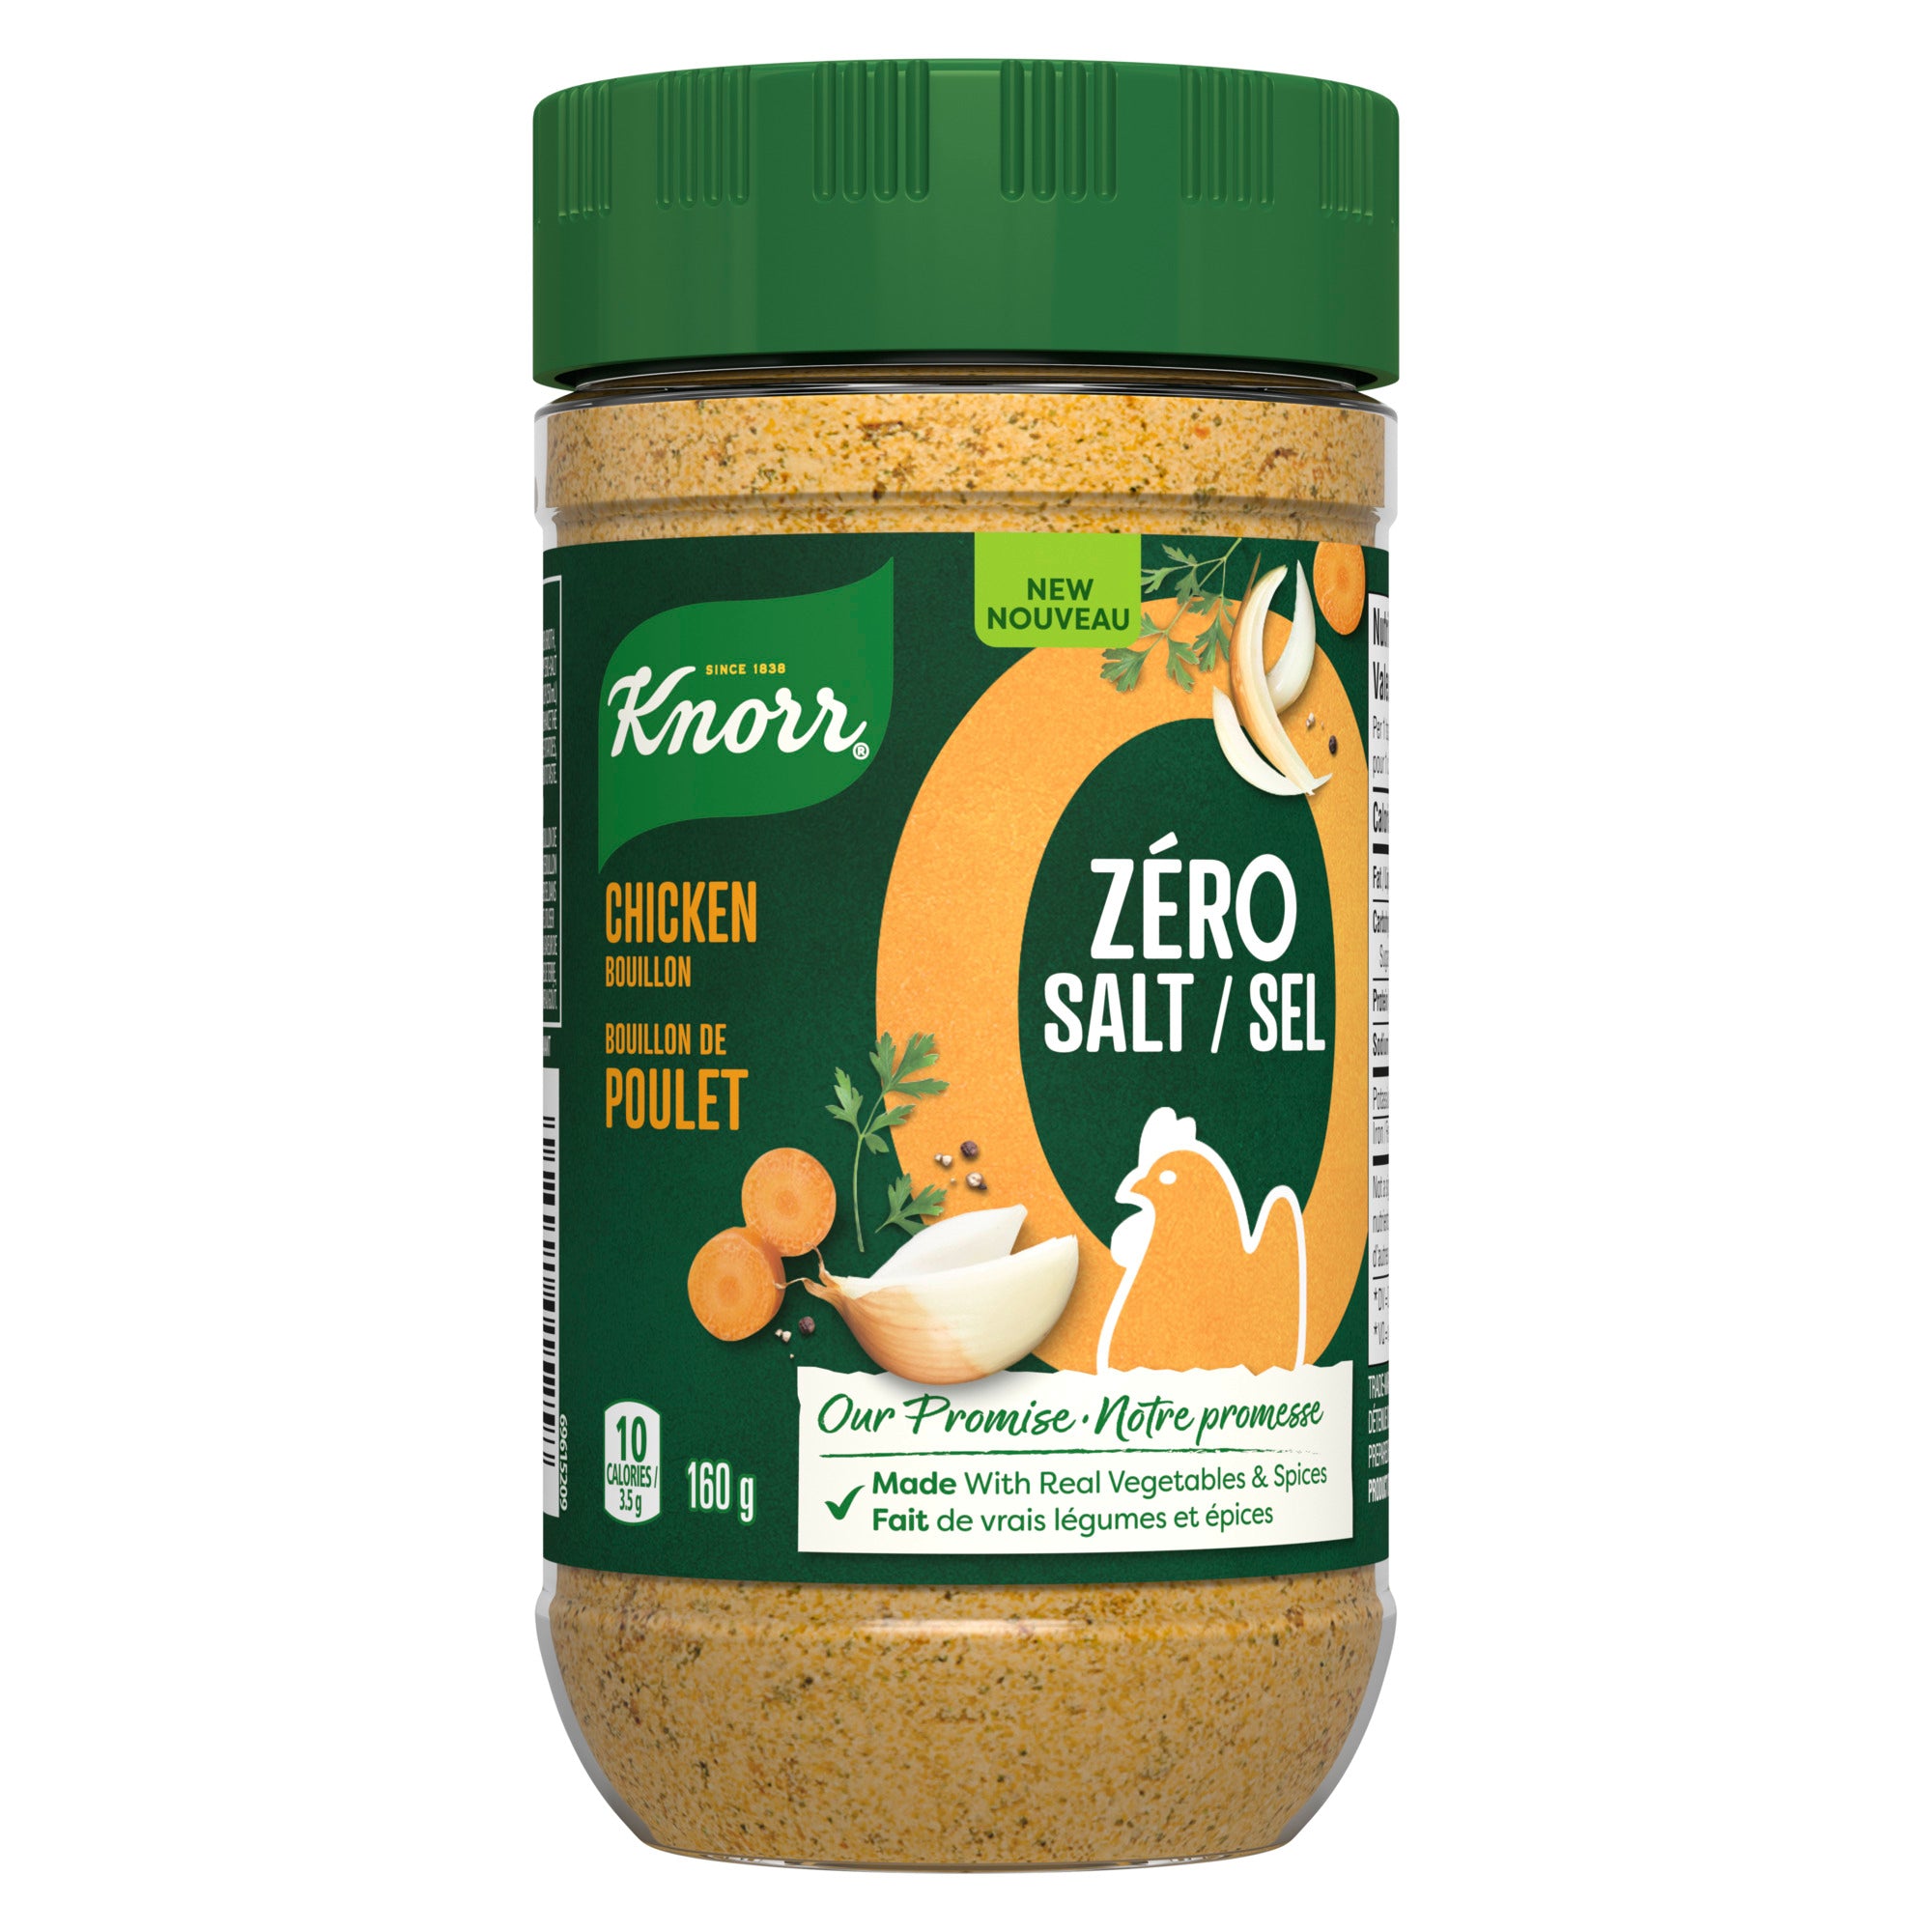 Showing the frontside view of the Knorr Zero Salt Chicken Bouillon Powder 160g product.